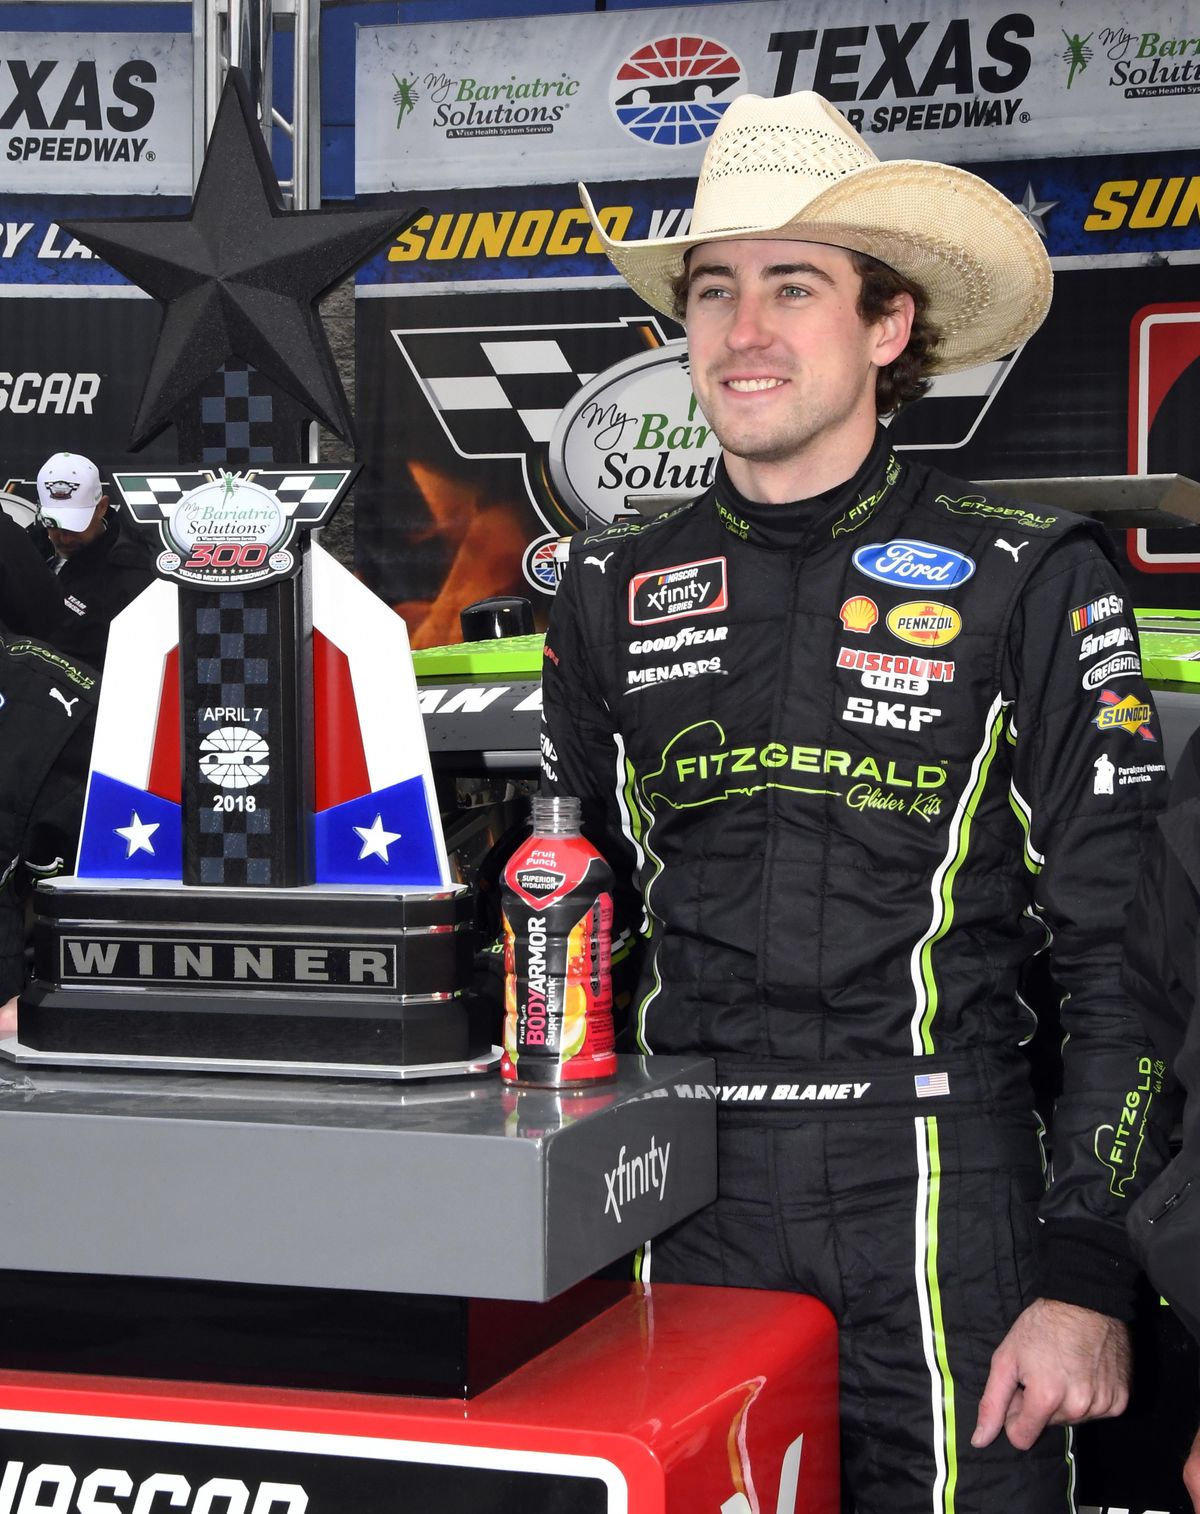 Ryan Blaney poses for photos by the trophy in Victory Lane after winning a NASCAR XFinity series auto race in Fort Worth, Texas, Saturday, April 7, 2018. (Larry Papke / Associated Press)